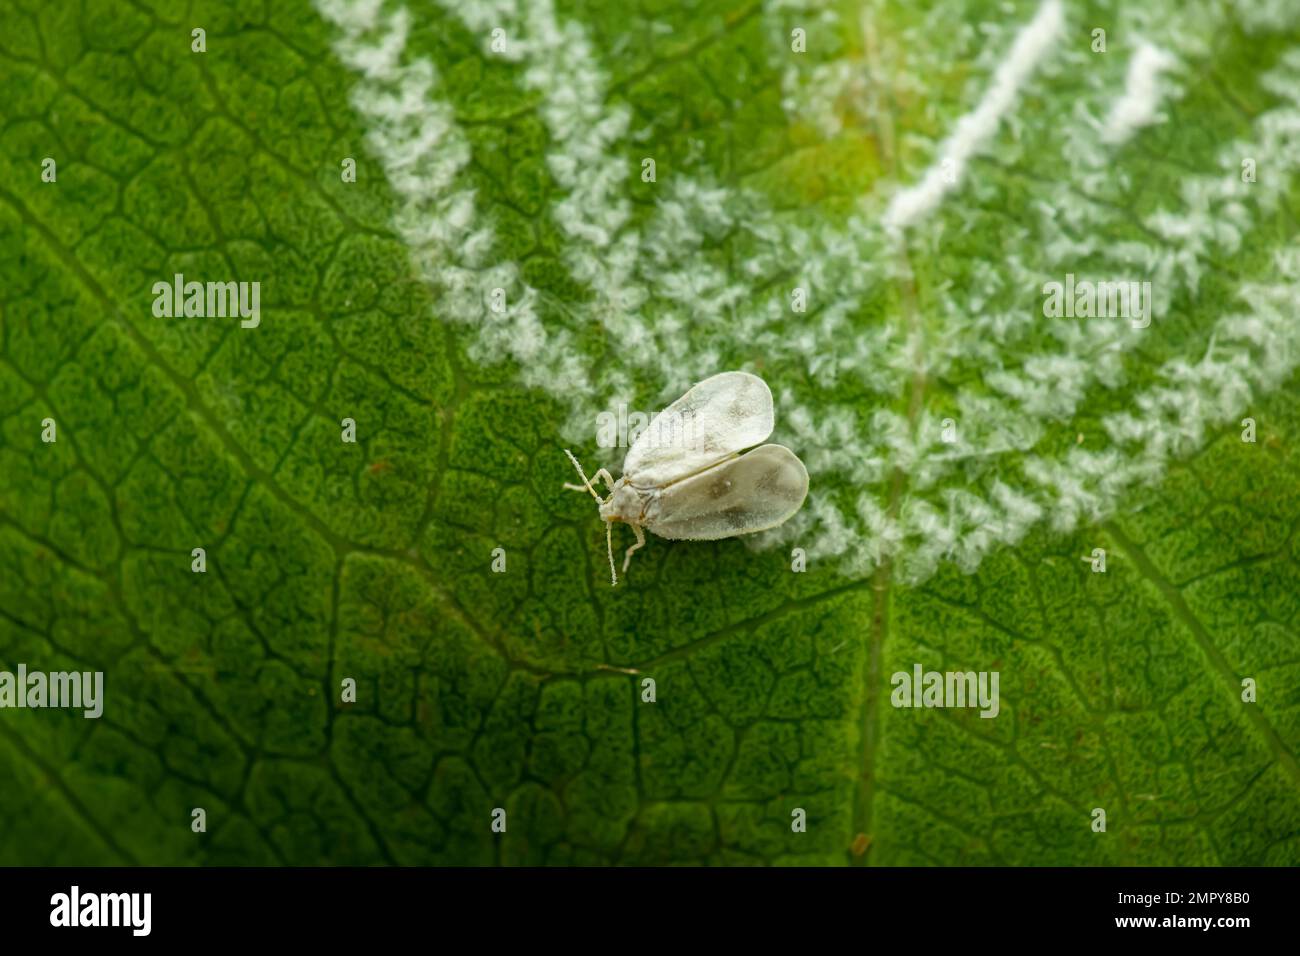 White fly on the leaf with its hairy wax like produce under the leaf. It is important and serious pest of agriculture crops. Stock Photo